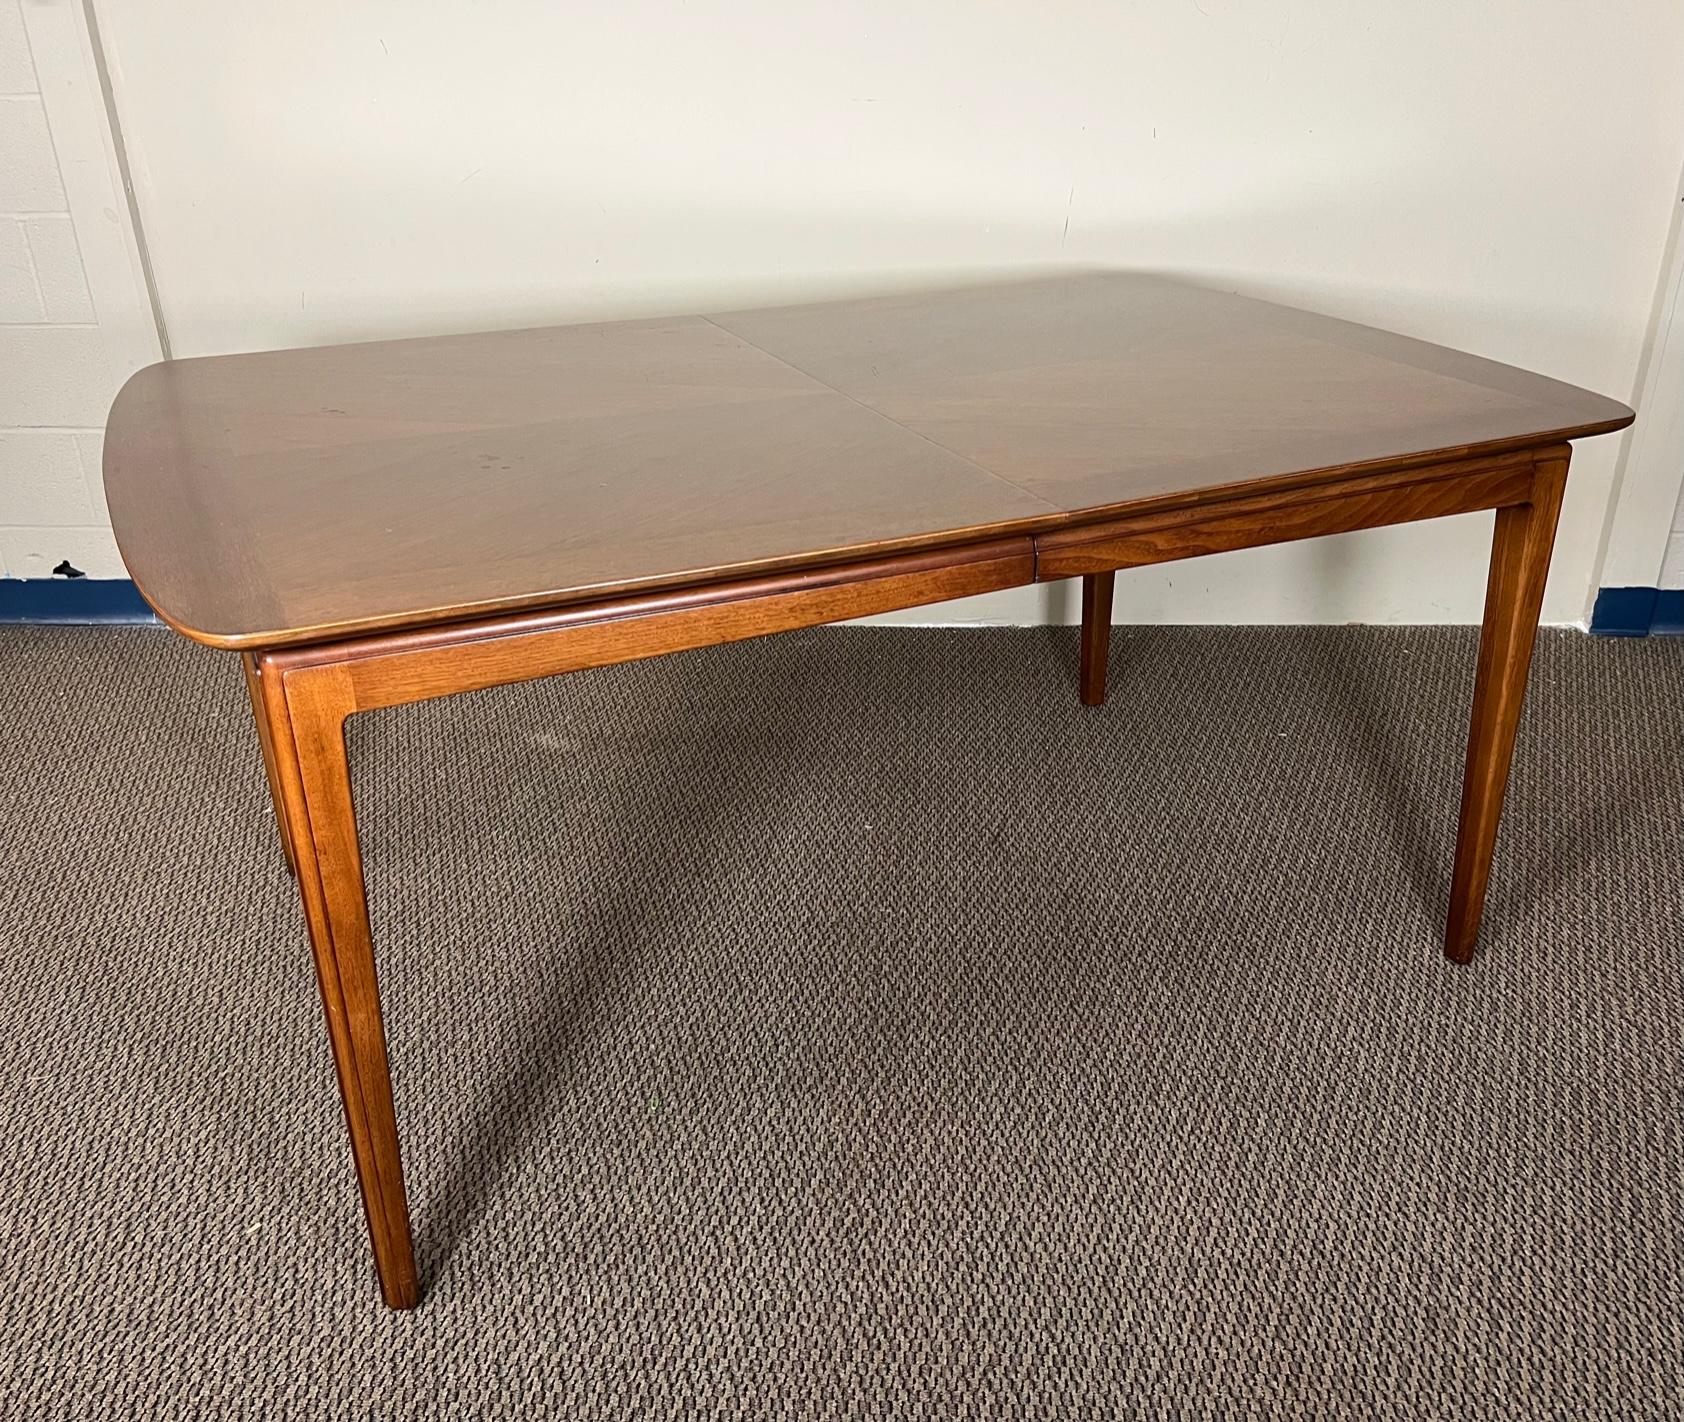 This is a large rectangular walnut dining table with rounded edges. It comes 2 extension leaves. Made by Henredon of North Carolina. Model circa'60. Original stamp underneath the table leaves. Fantastic condition. Minor marks. Small gouges.